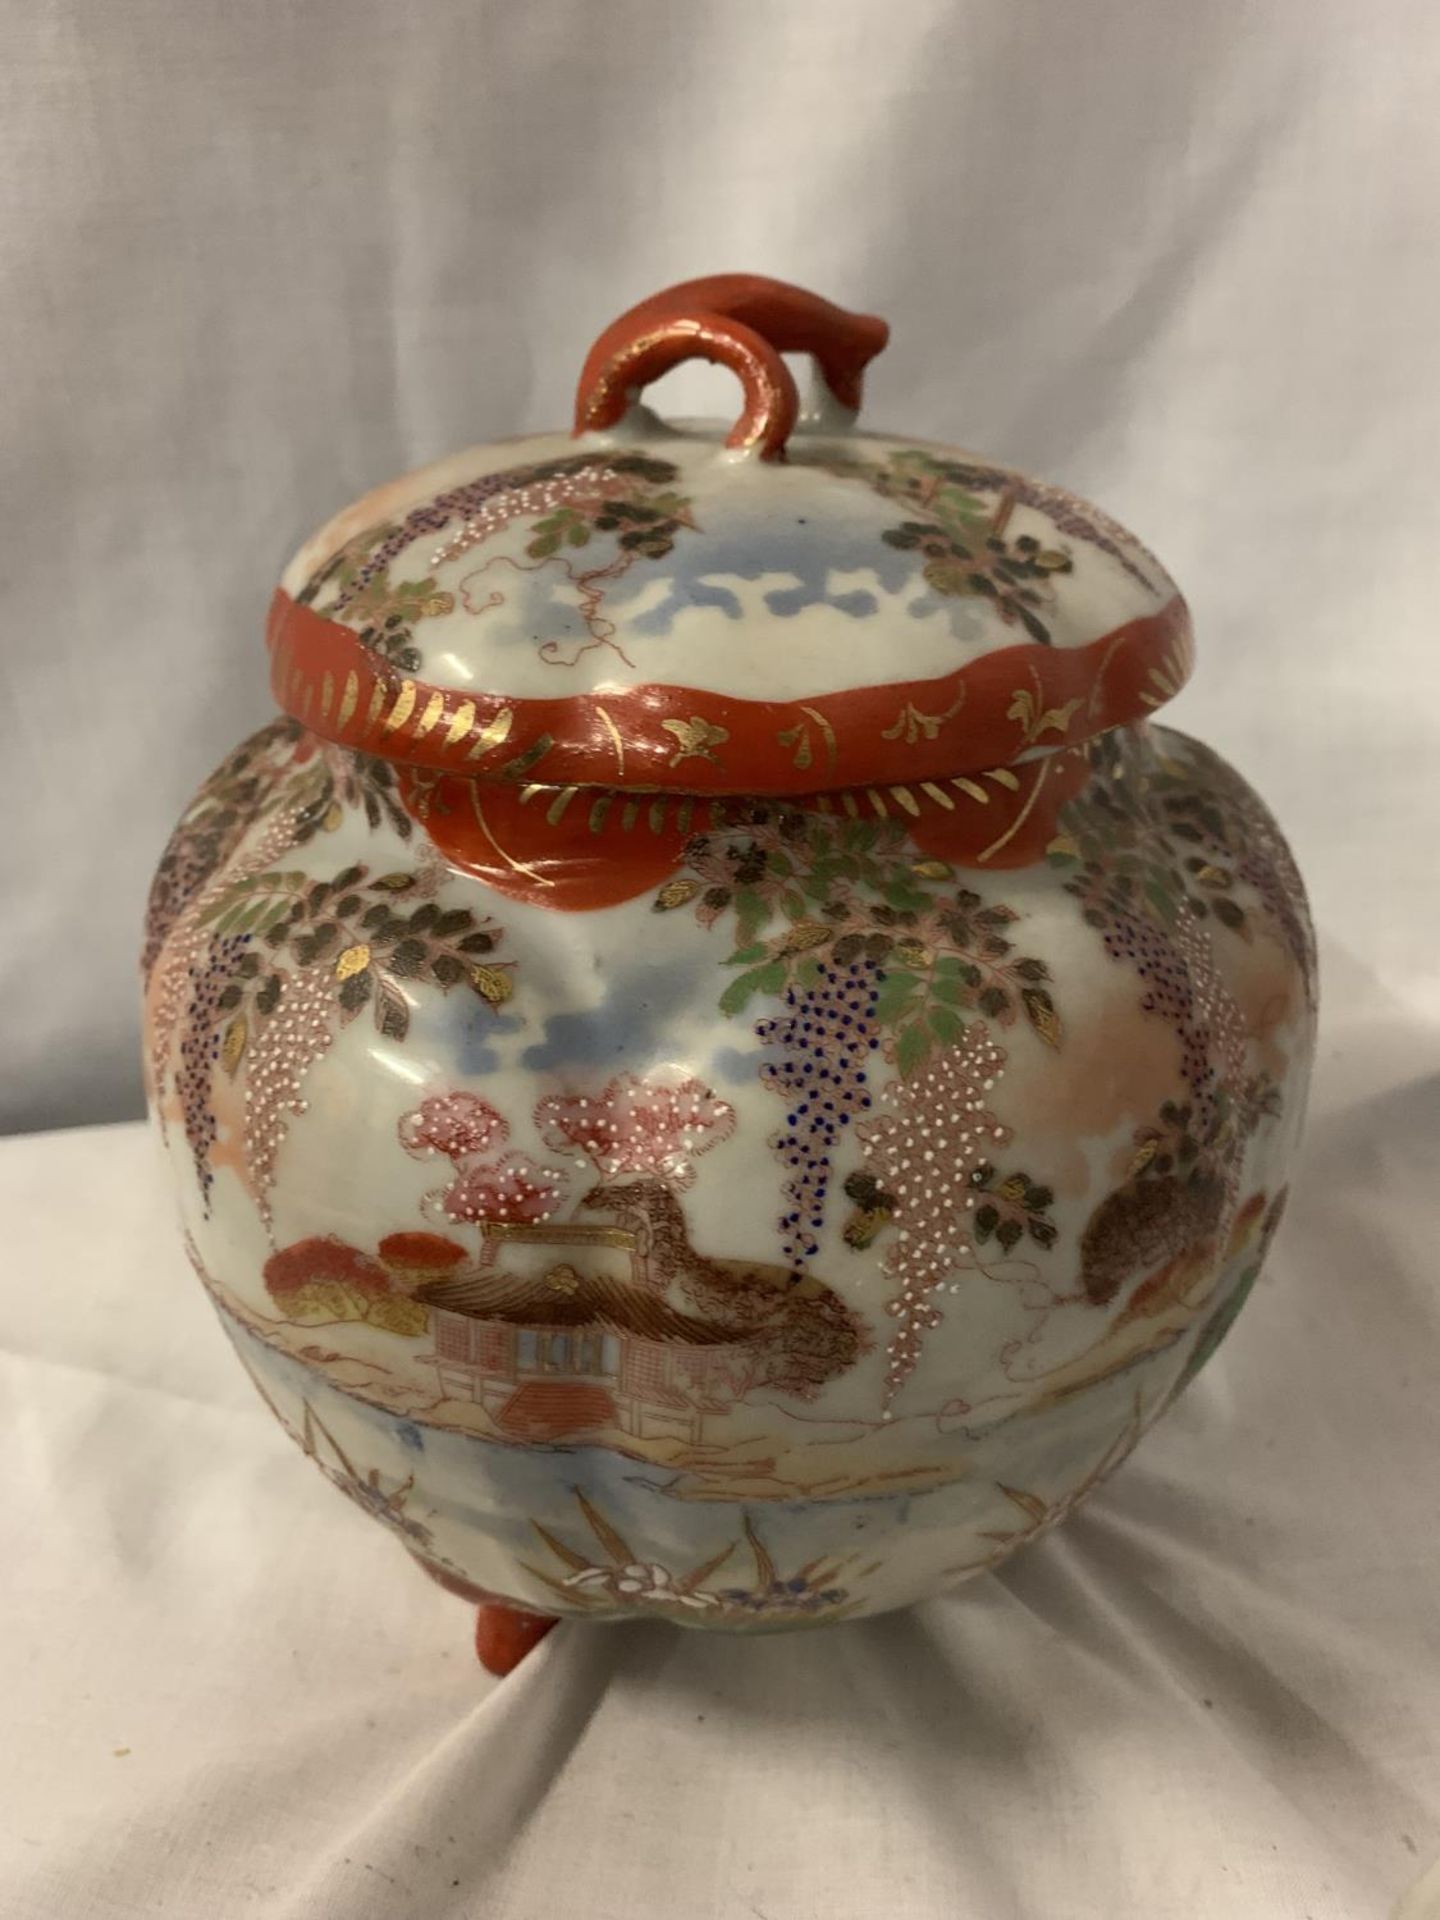 A JAPENESE STYLE COLLECTION TO INCLUDE A JAPENESE STYLE LIDDED JAR, TEA POT , JUG AND A PAINTED BOWL - Image 6 of 9